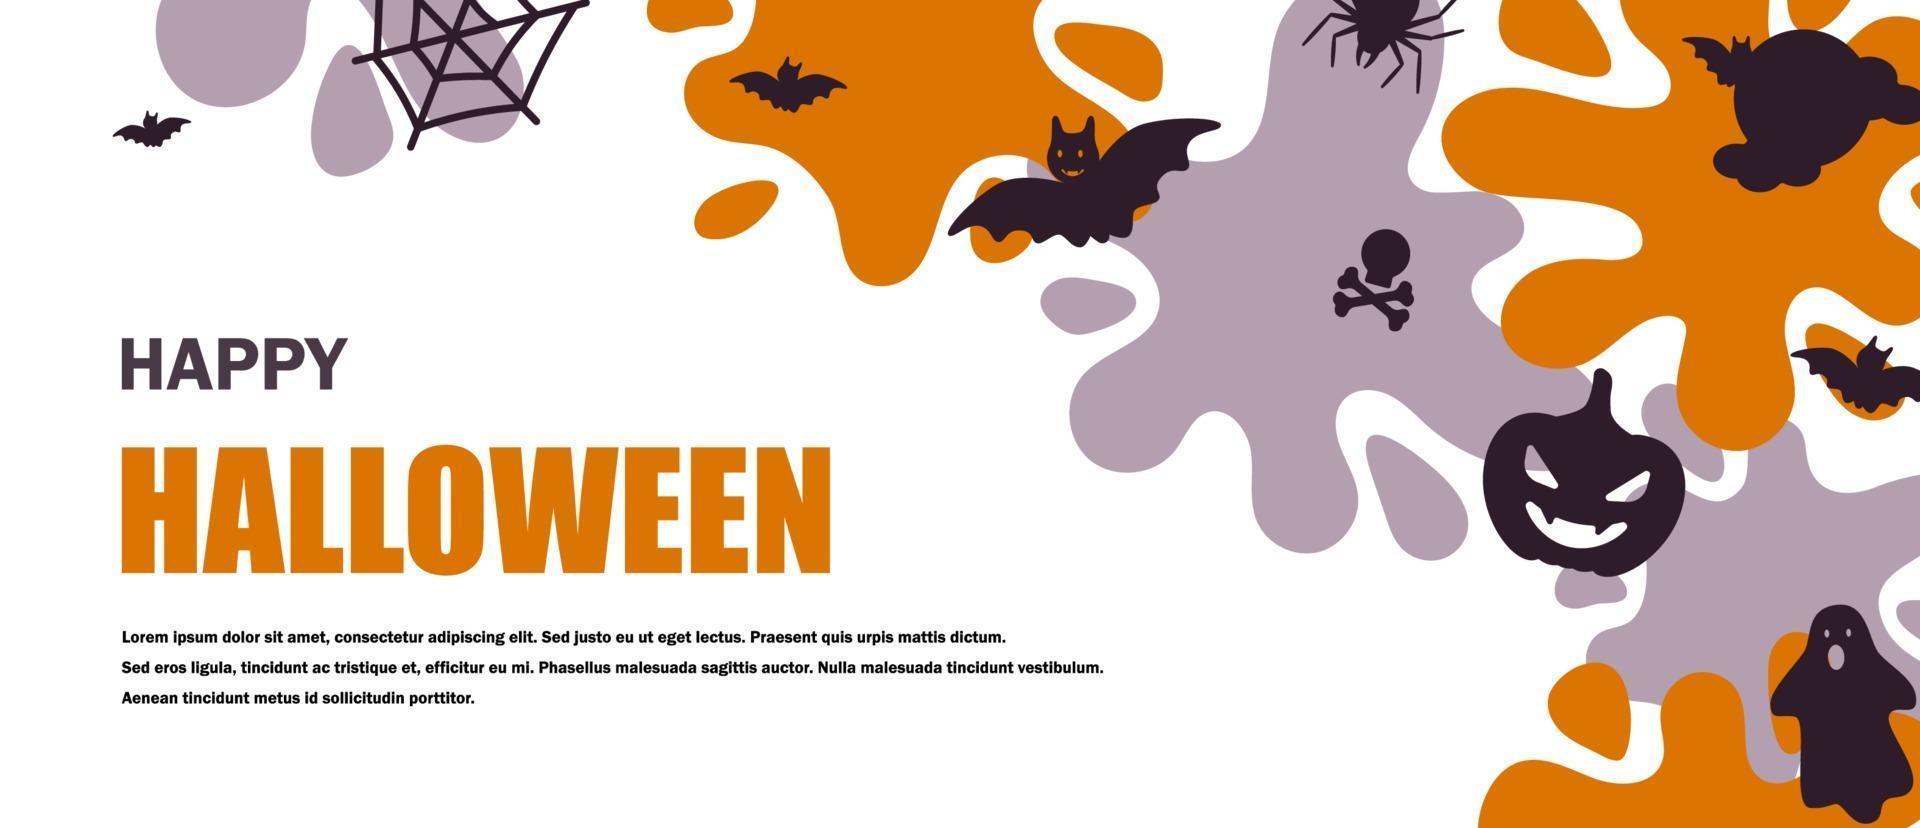 Halloween horizontal banner. Space for text. Vector illustration